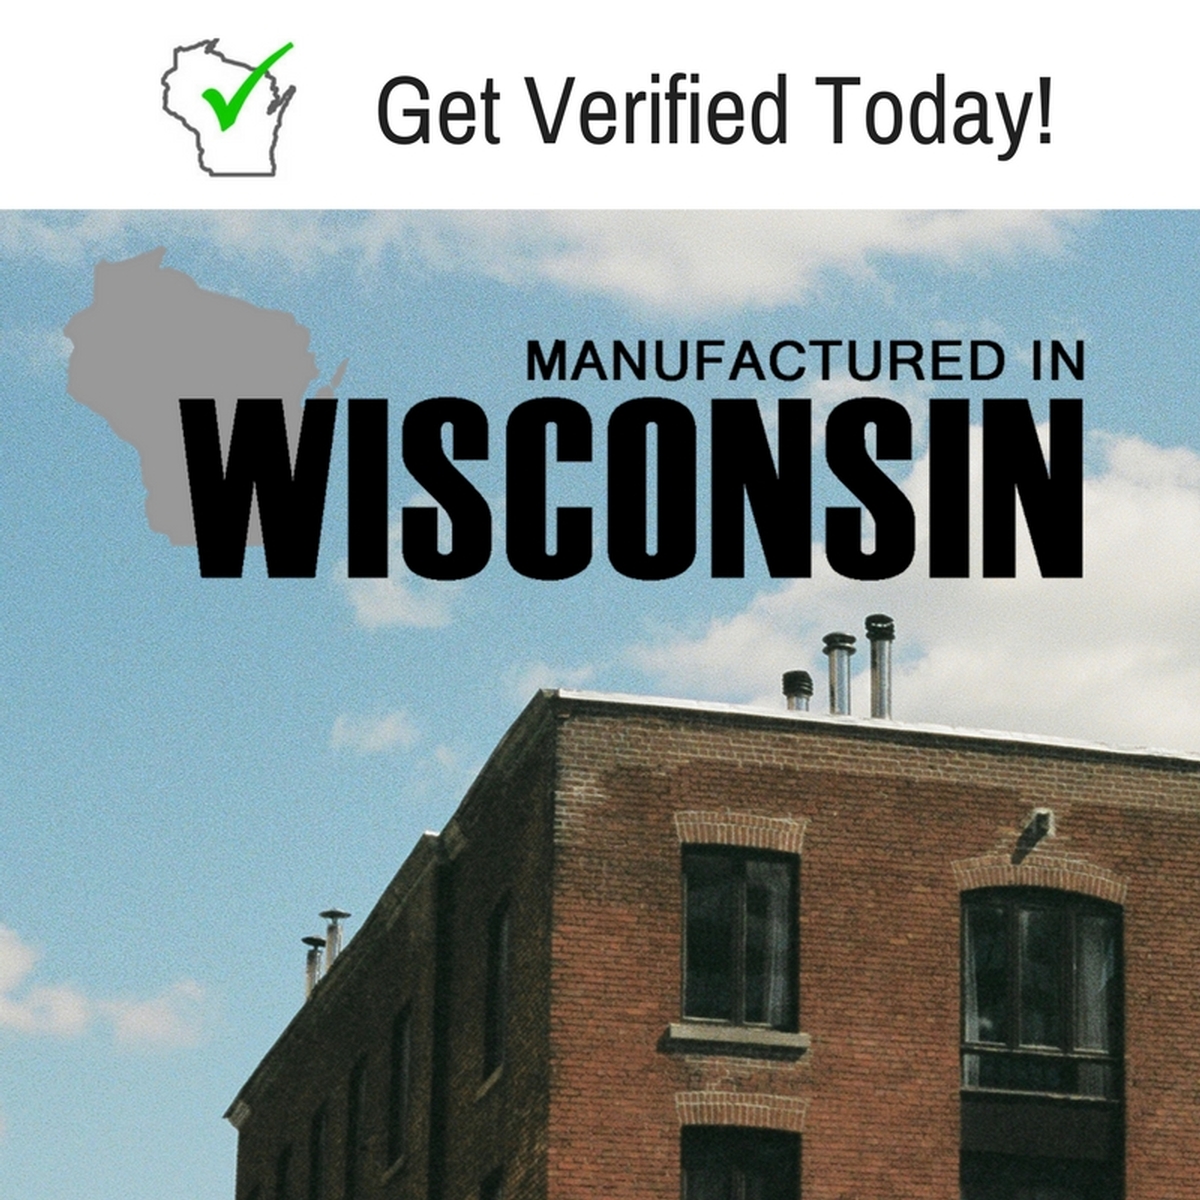 Get Your Wisconsin Manufacturing Company Verified Today!